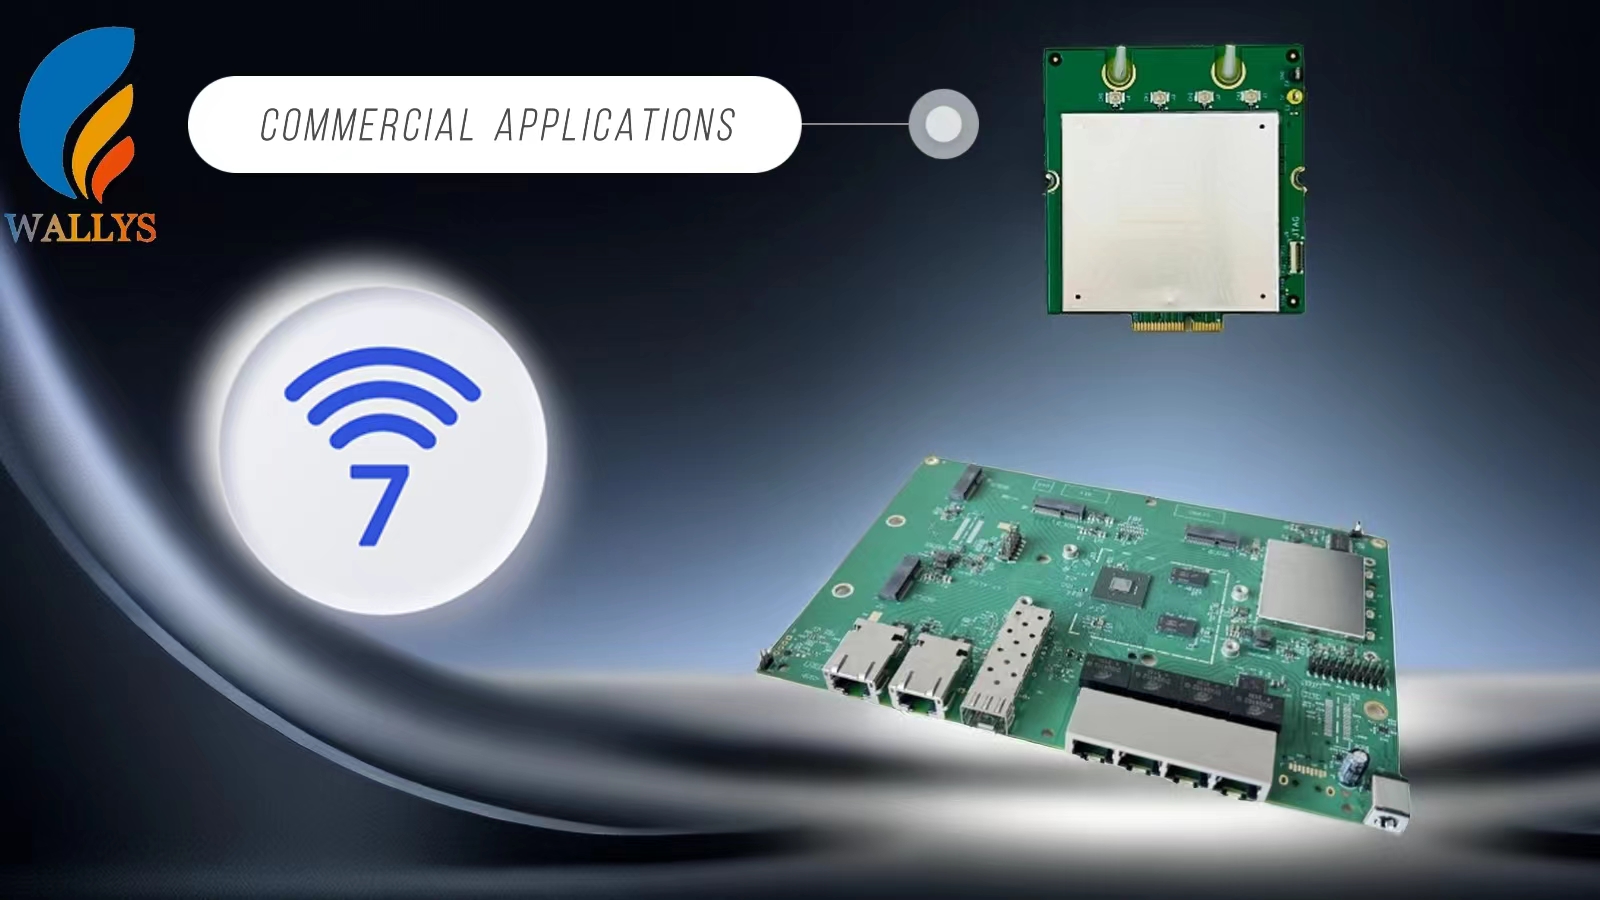 IPQ9554 with QCN6274 Solution for Commercial Applications|Wi-Fi 7